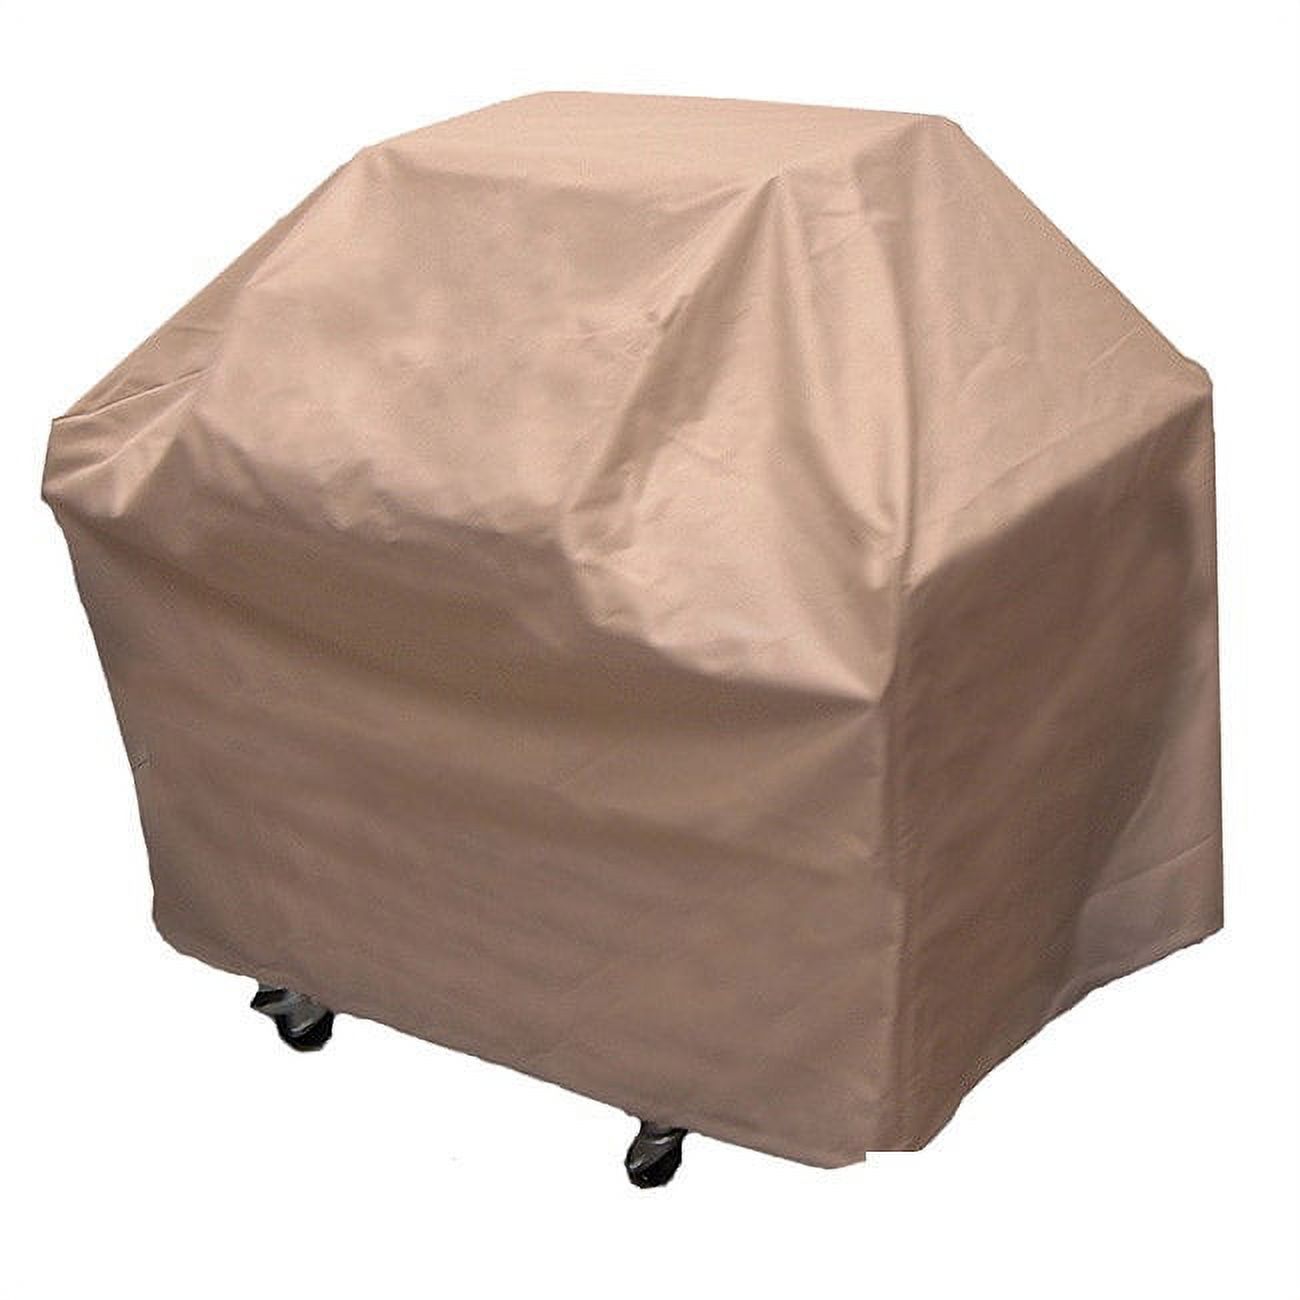 Sure Fit Medium Grill Cover, Taupe - image 2 of 3